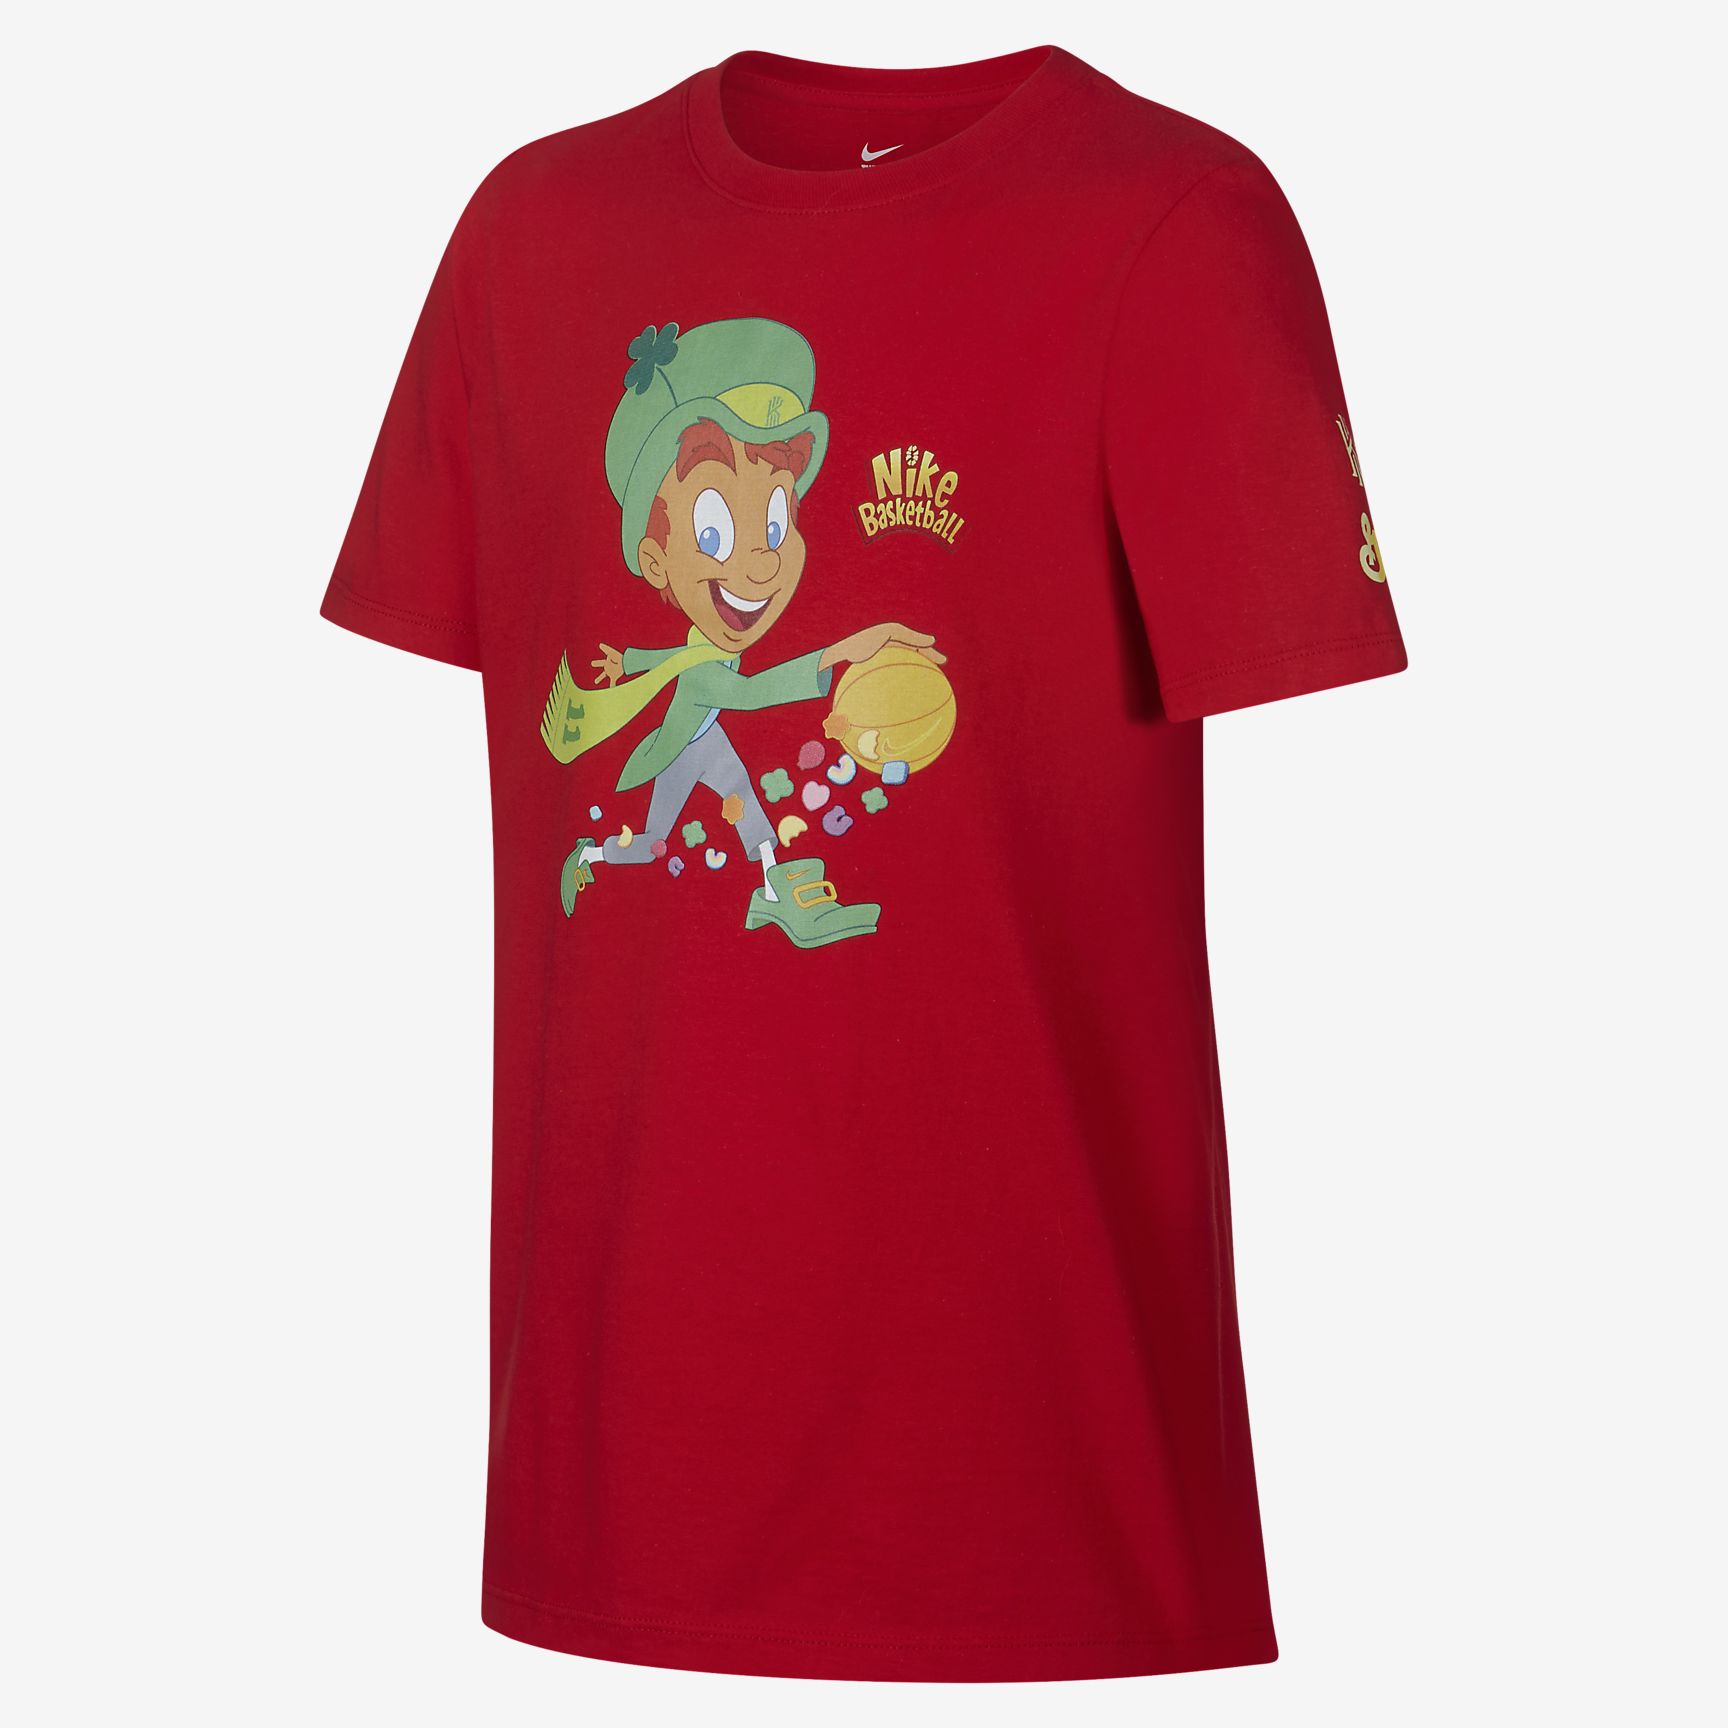 nike kyrie lucky charms shirt online -